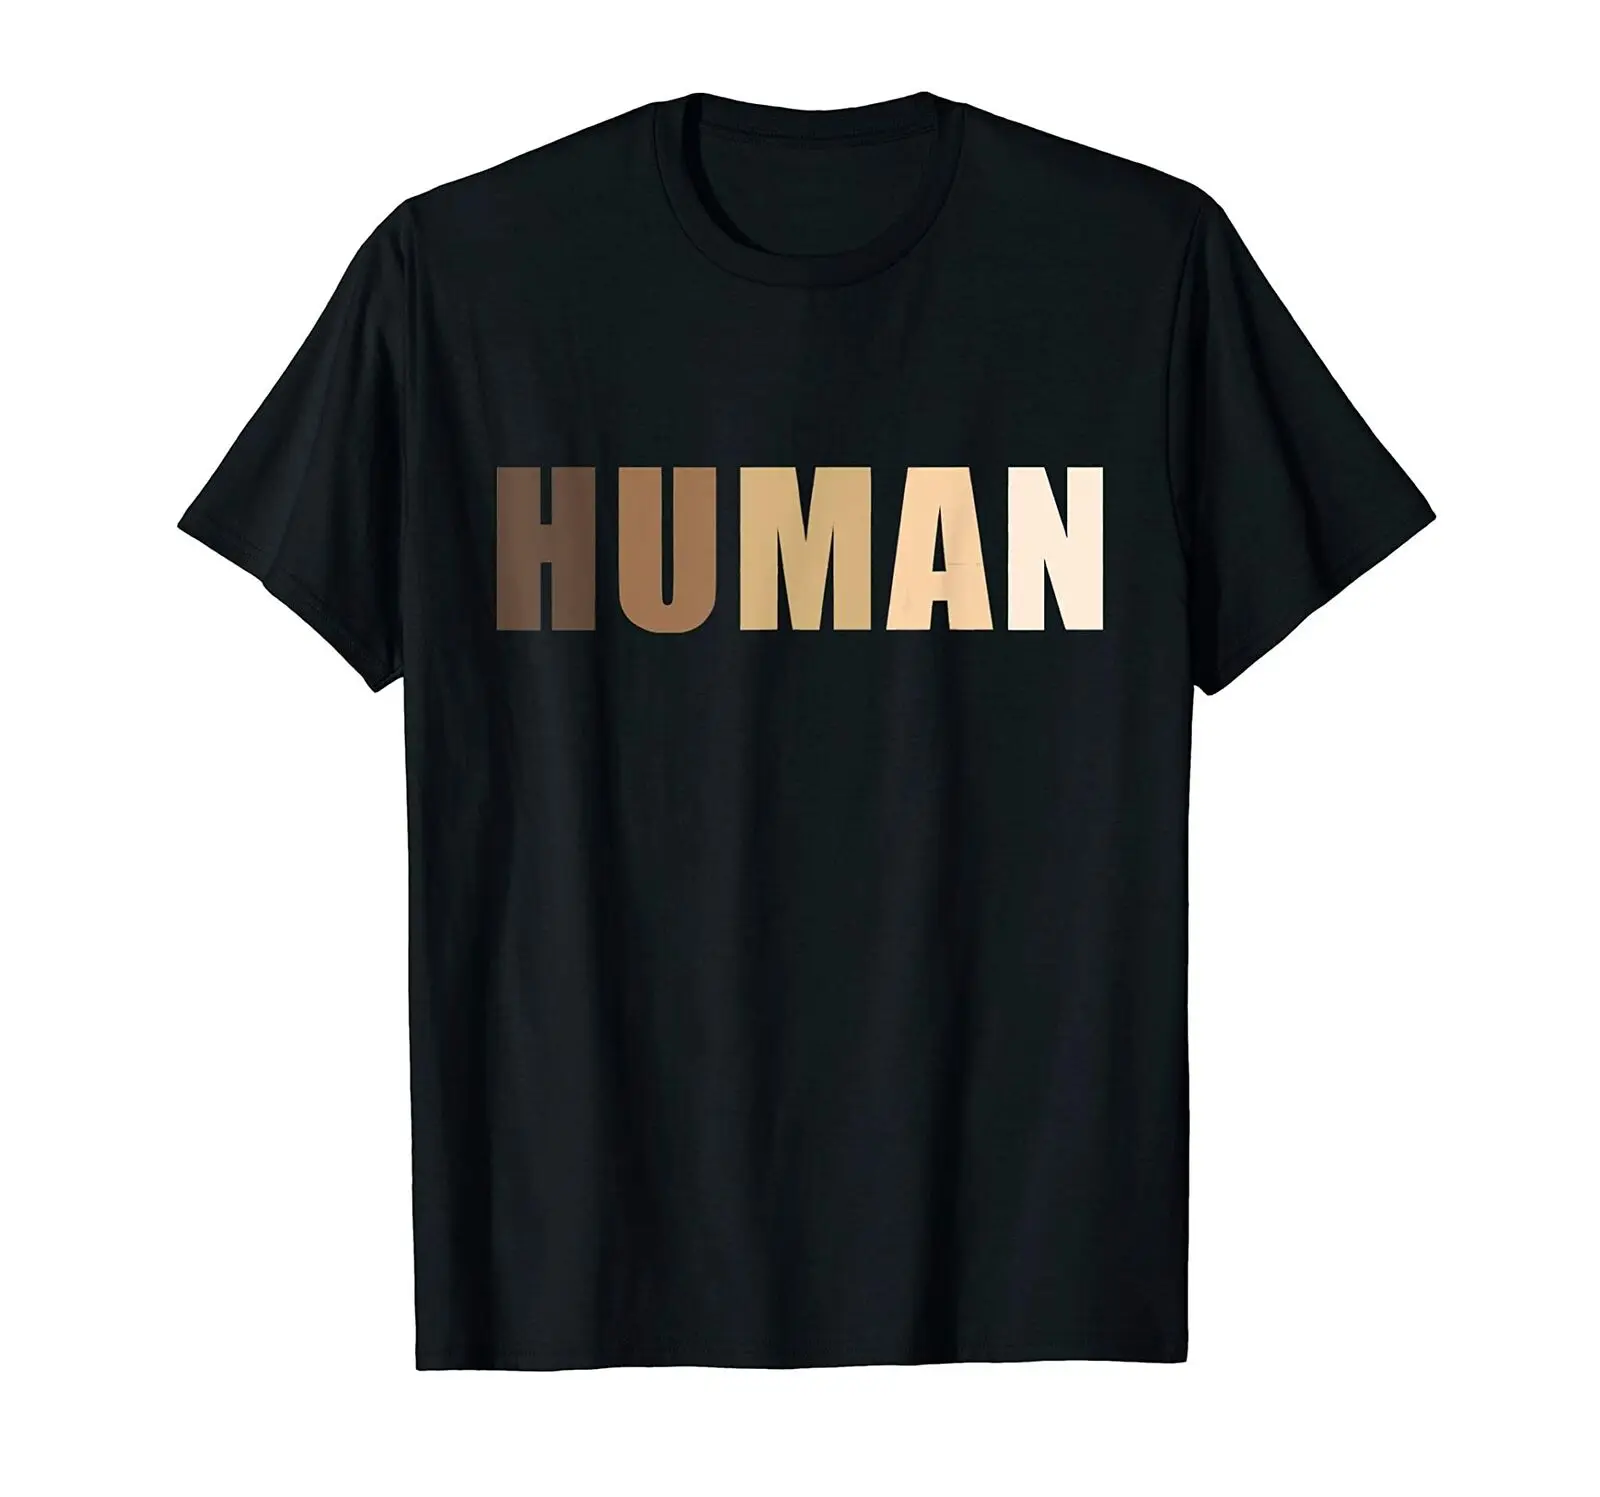 

2021 Summer Men's T-shirt Human Anti Racism Black Lives Matter History Month Equality Casual O-neck High-quality Cotton T-shirt